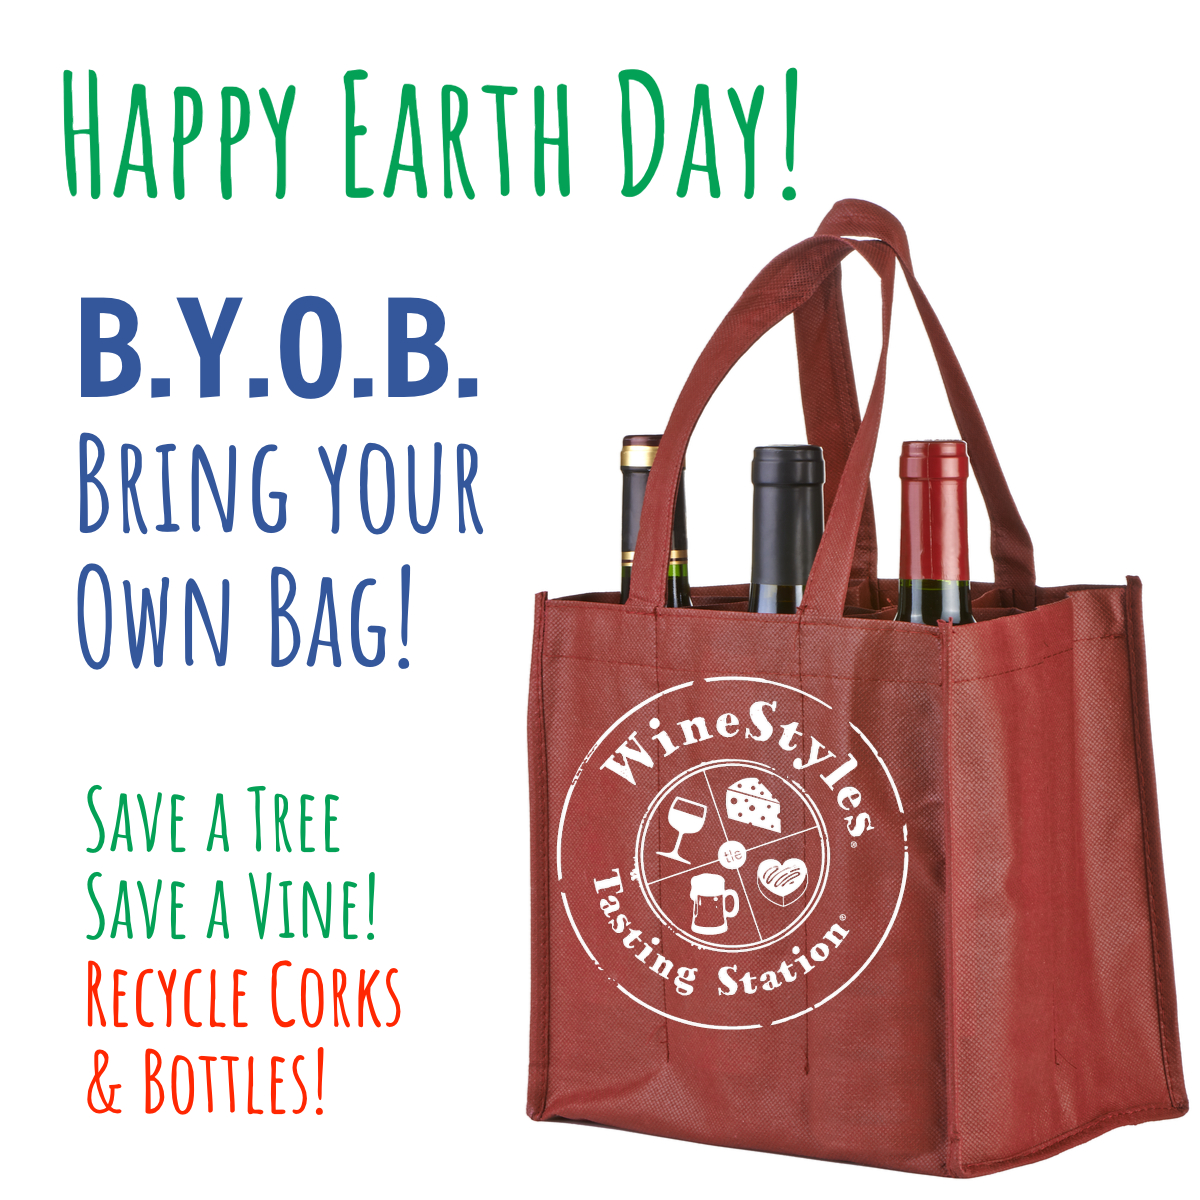 🌱 Sip sustainably this Earth Day! 🍷Grab a glass of SIP Certified Ancient Peaks wines or Hope Family wines! Because when you choose sustainability, every sip feels even better! #EarthDay #SustainableCheers #OrganicWines #SIPcertified #Recycle #UpCycle #EarthDay2024 @earthday